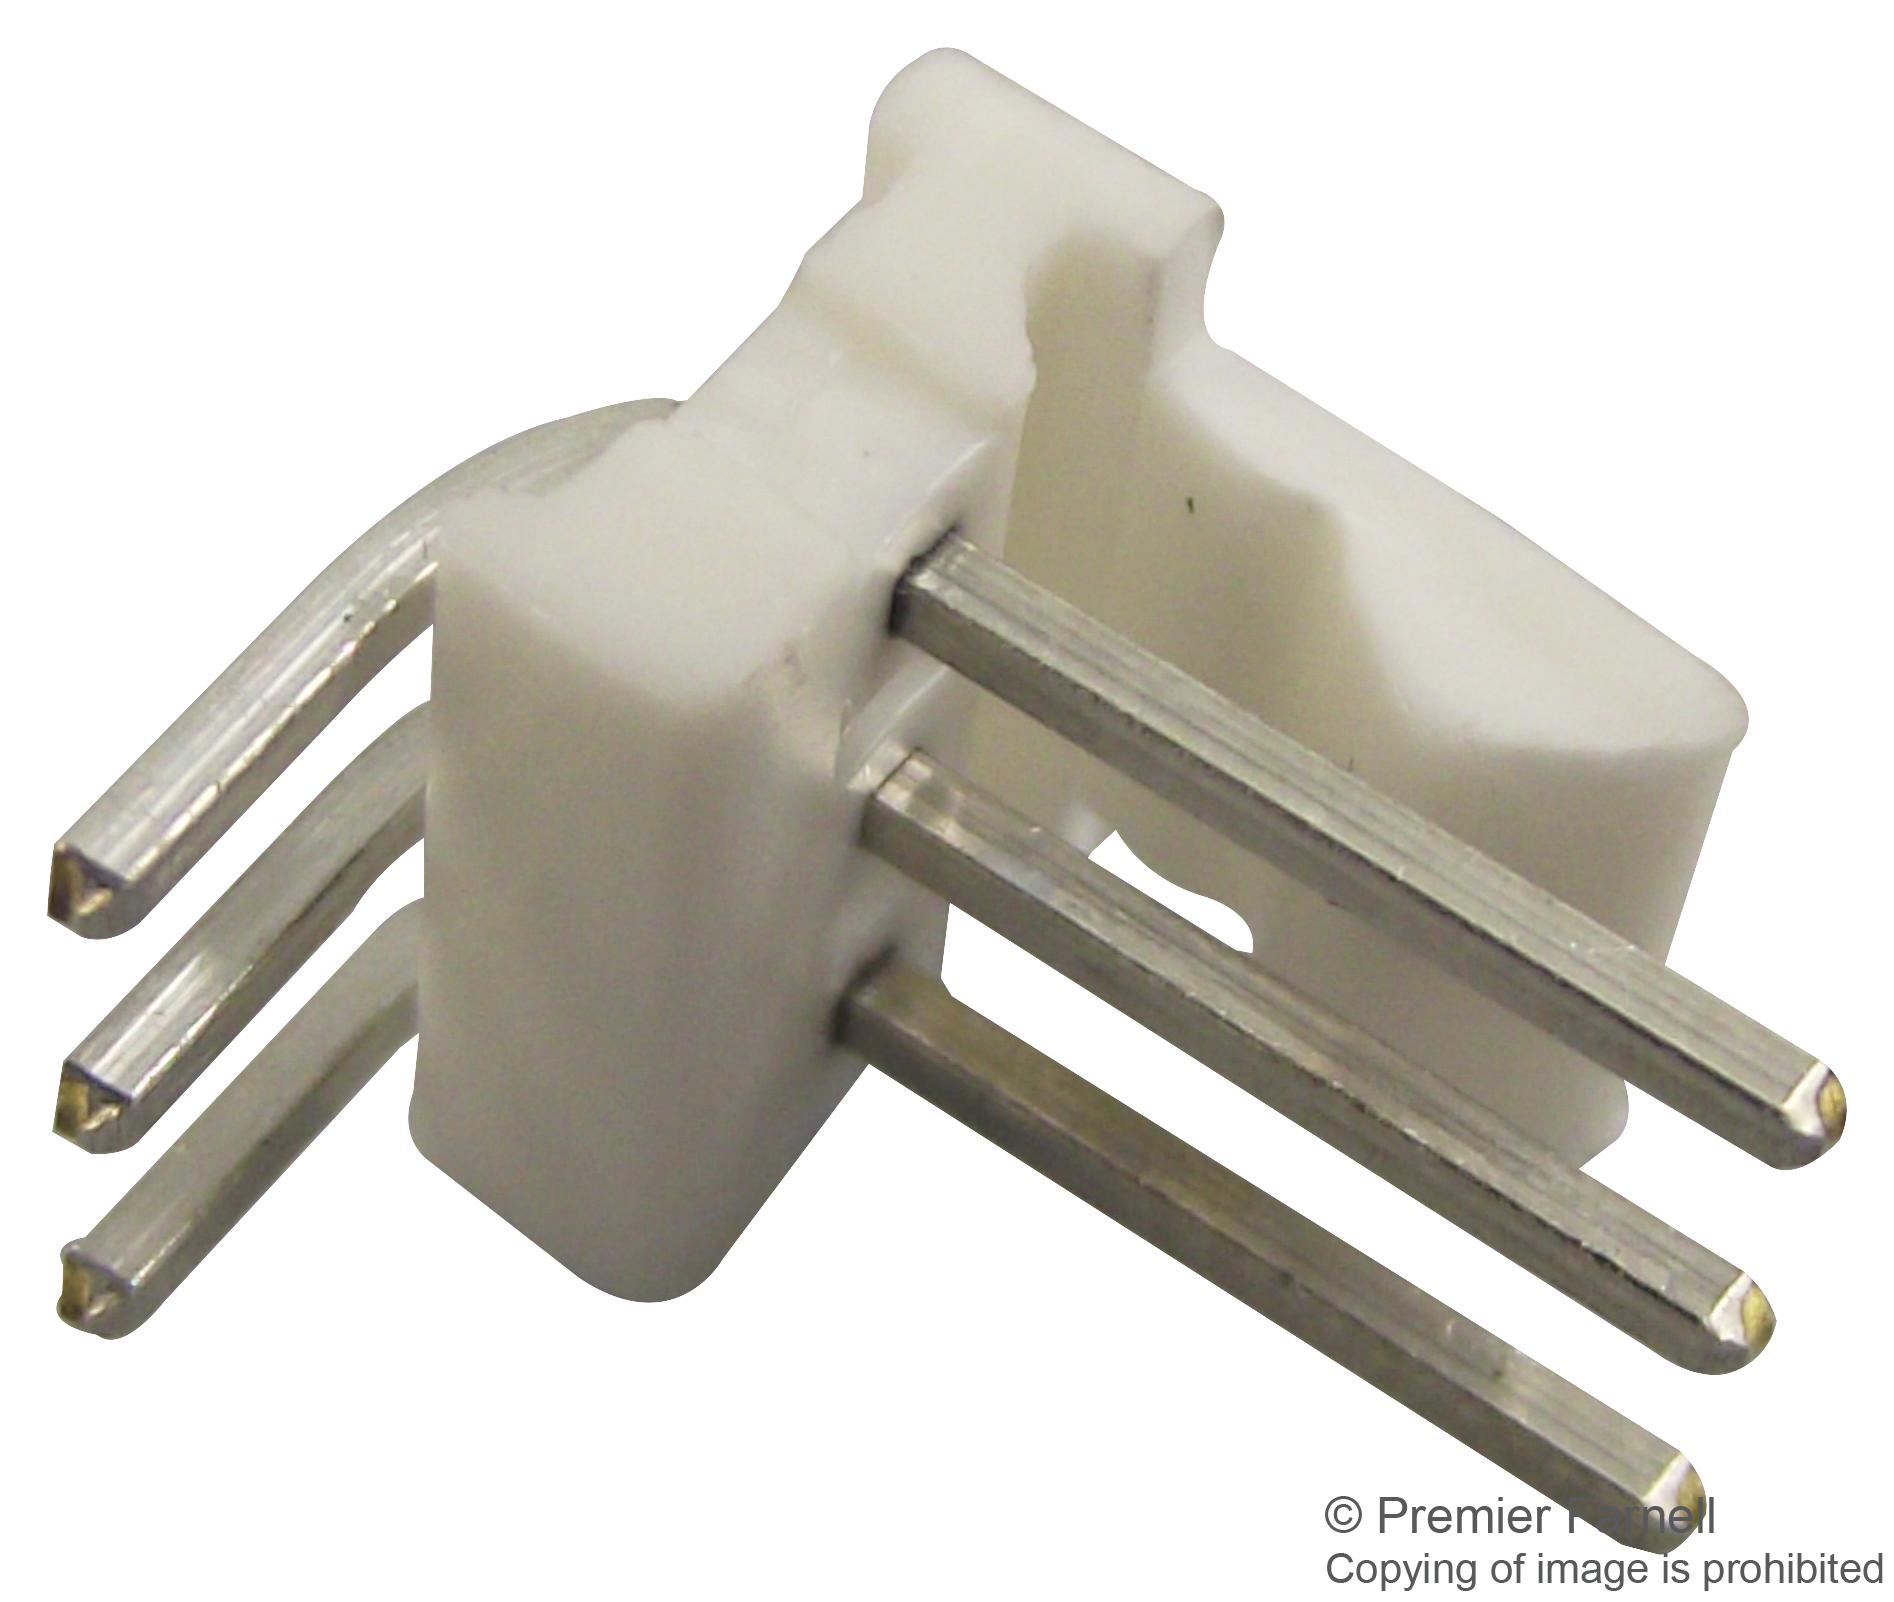 640457-3 HEADER, RIGHT ANGLE, 0.1", 3WAY AMP - TE CONNECTIVITY